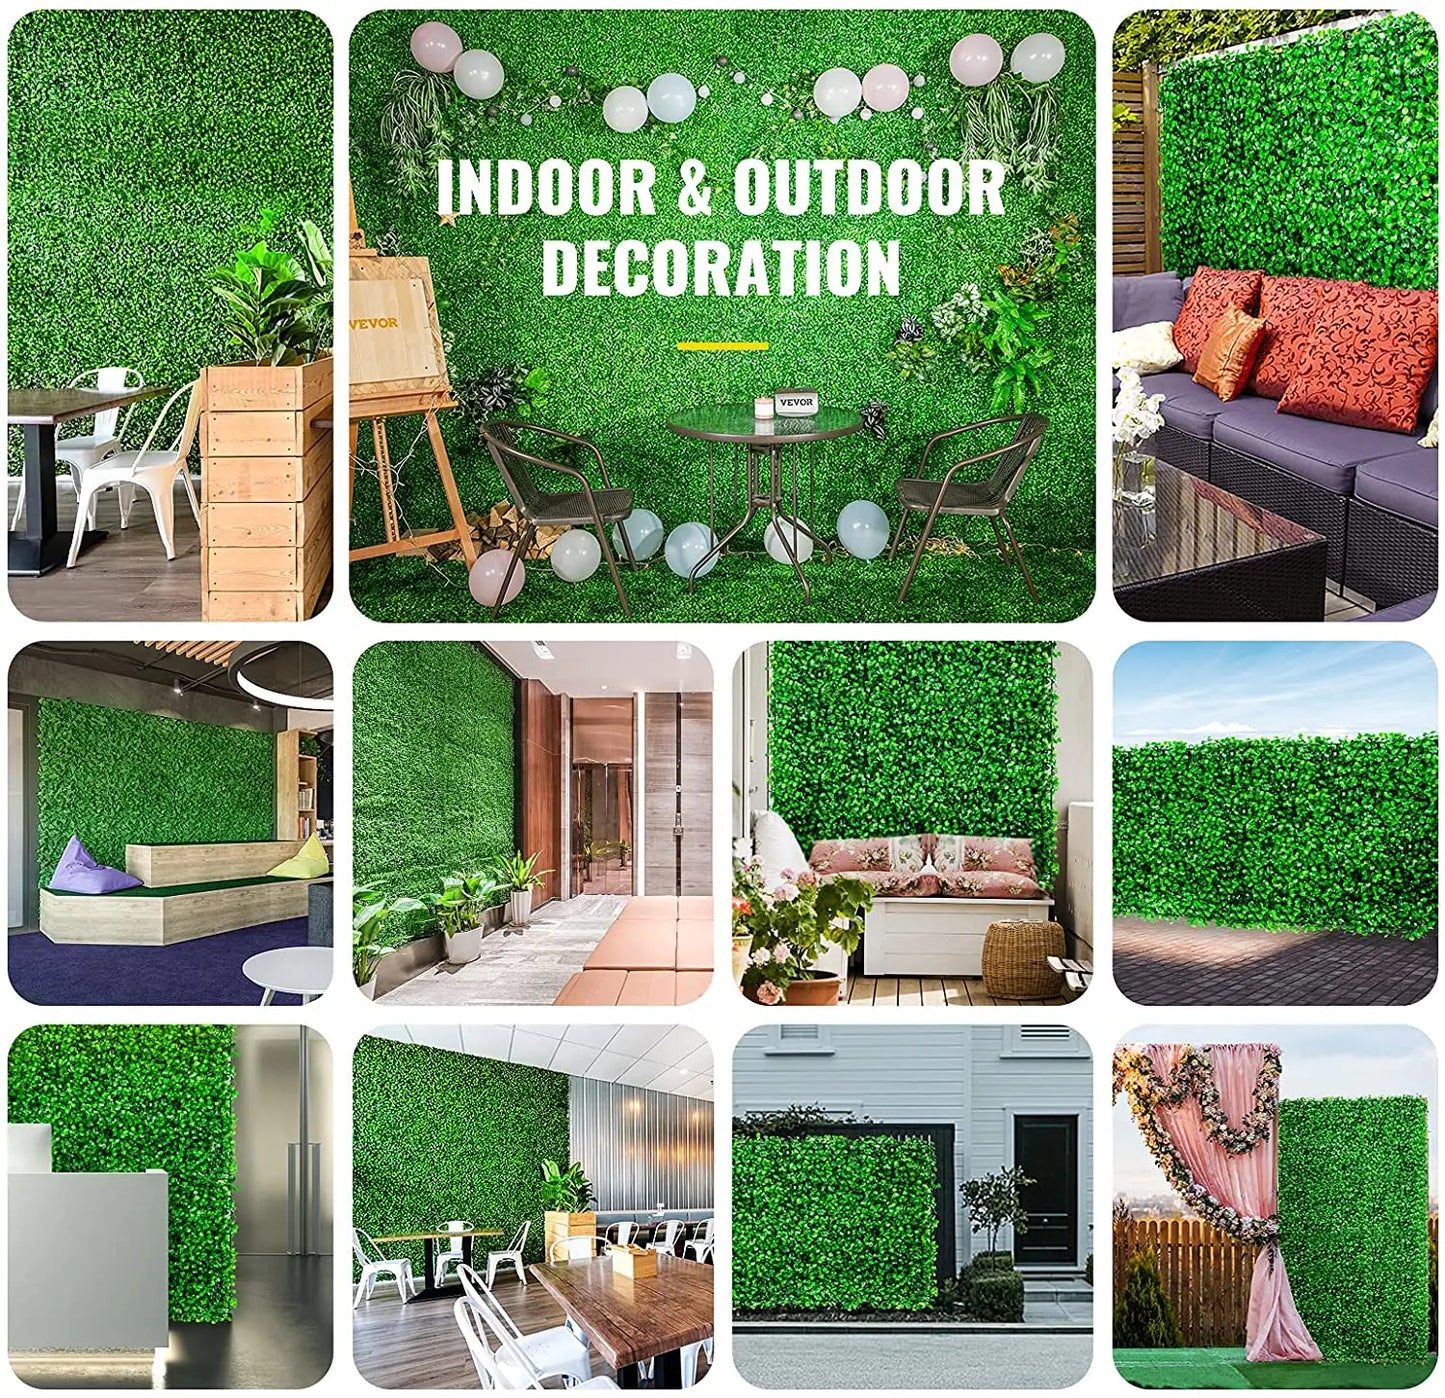 Artificial Plant Wall Decoration